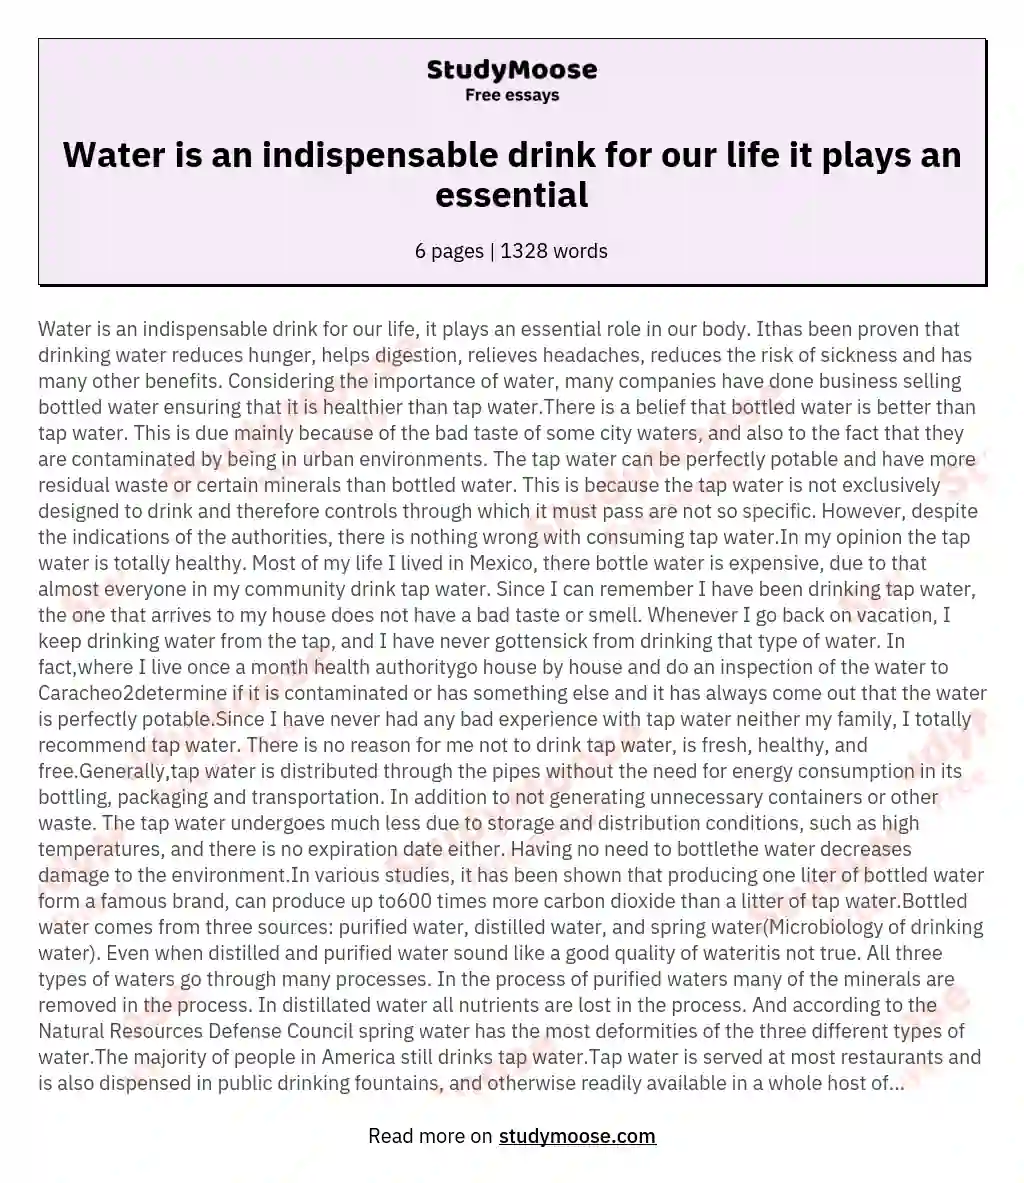 Water is an indispensable drink for our life it plays an essential